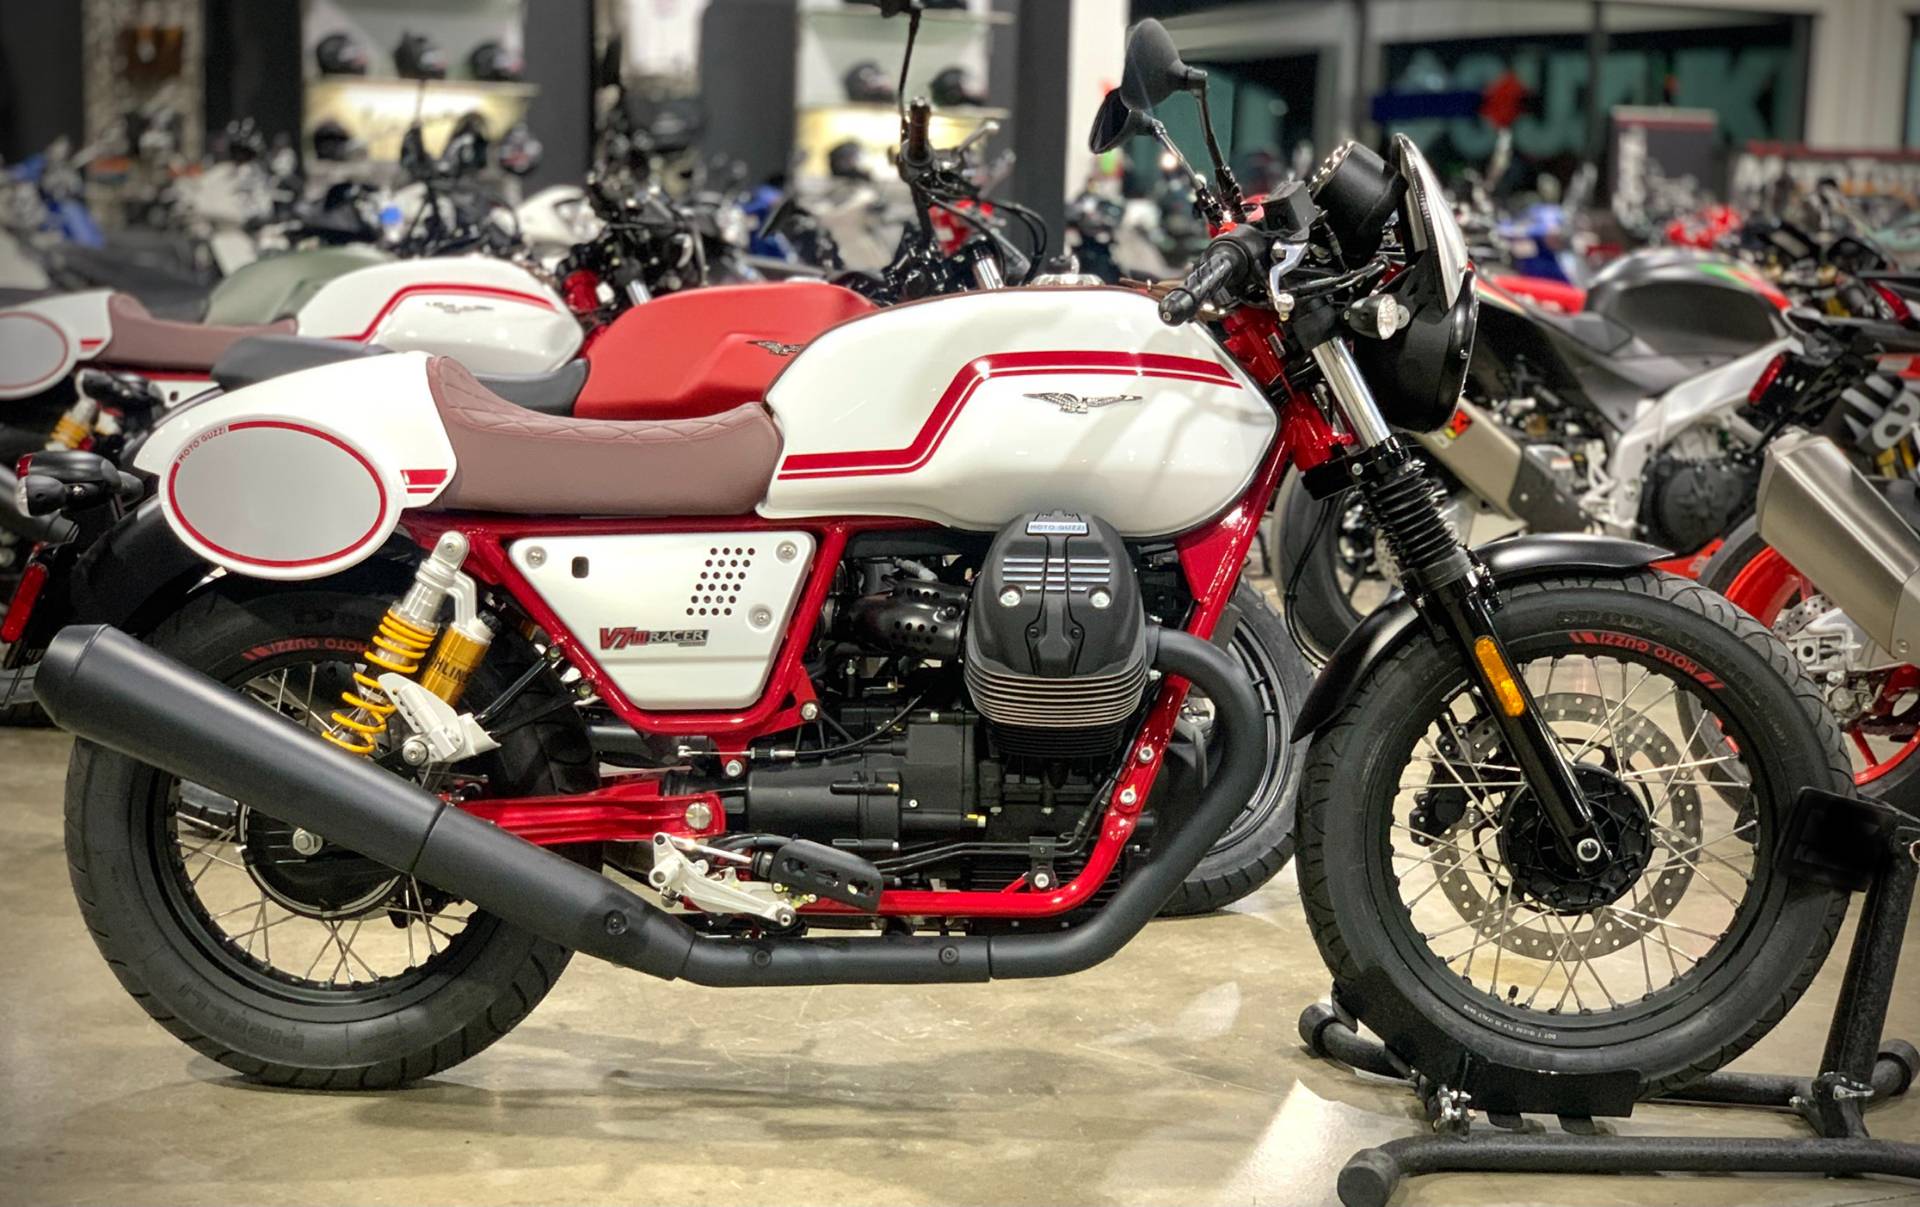 New 2020 Moto Guzzi V7 Iii Racer Le Motorcycles In Plano Tx N A Racer